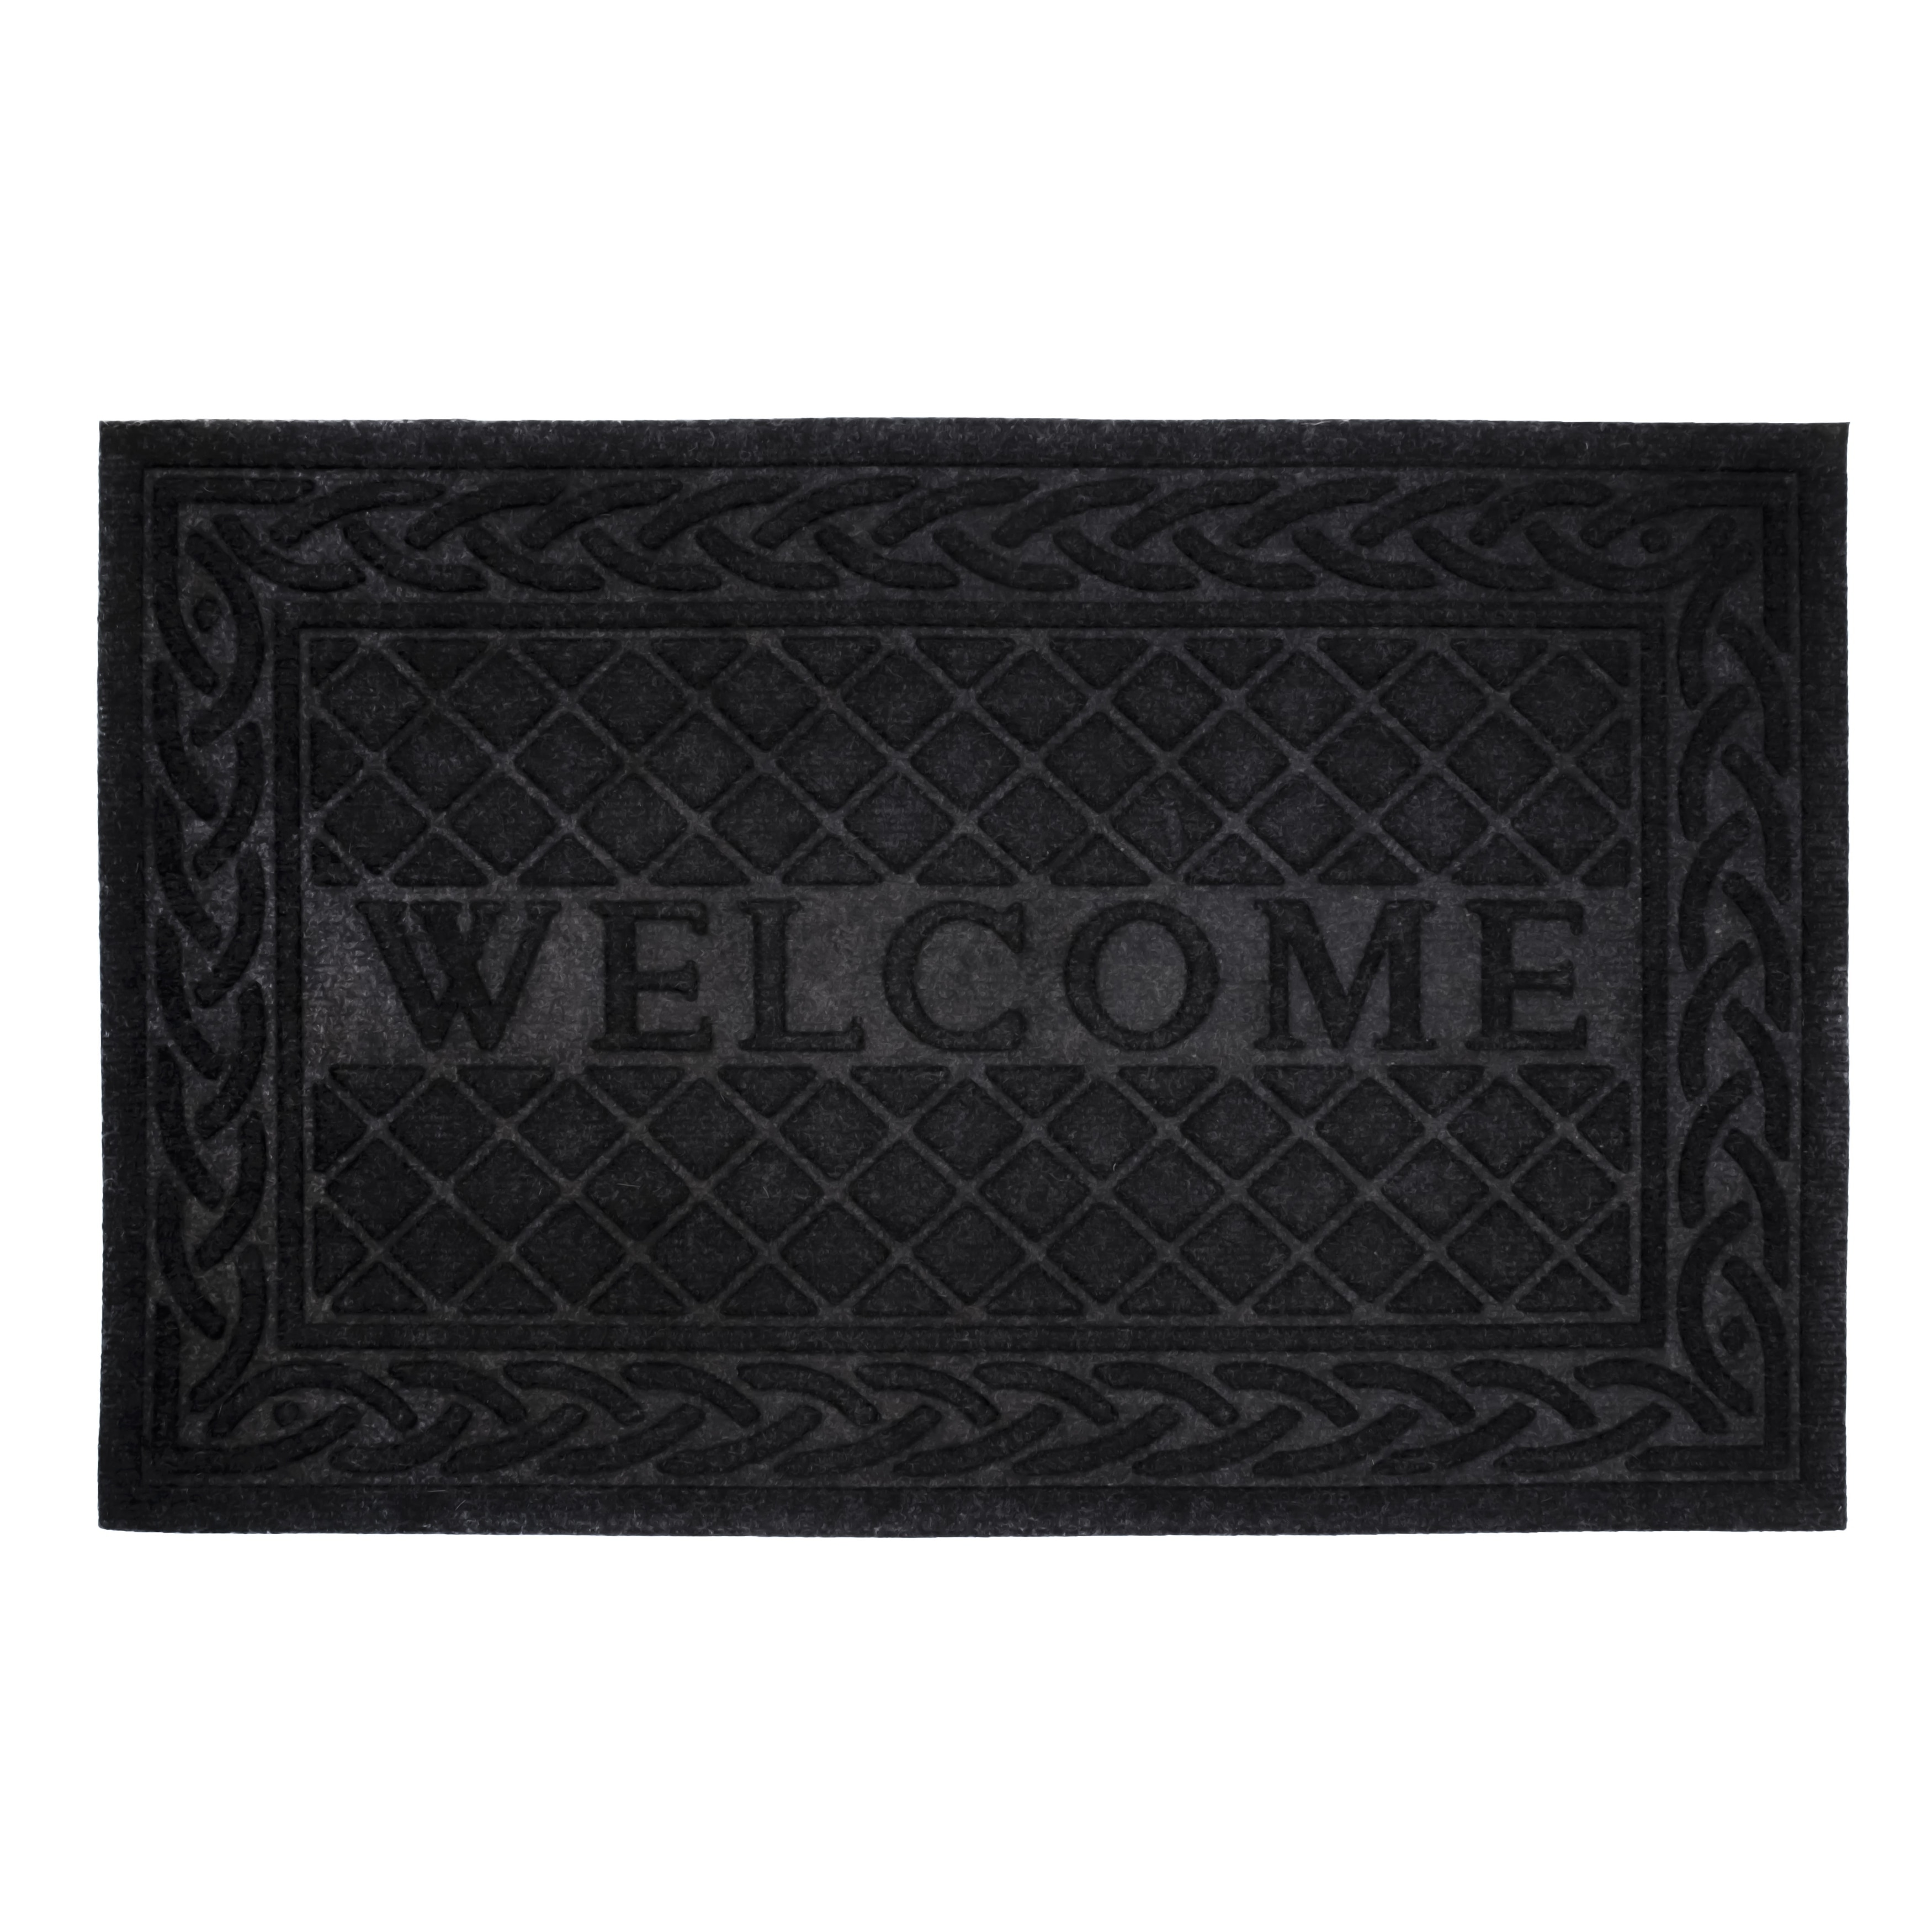 Mascot Hardware Welcome Letter Printed Non-Slip Doormats For Indoor and  Outdoor, Black - On Sale - Bed Bath & Beyond - 37667393